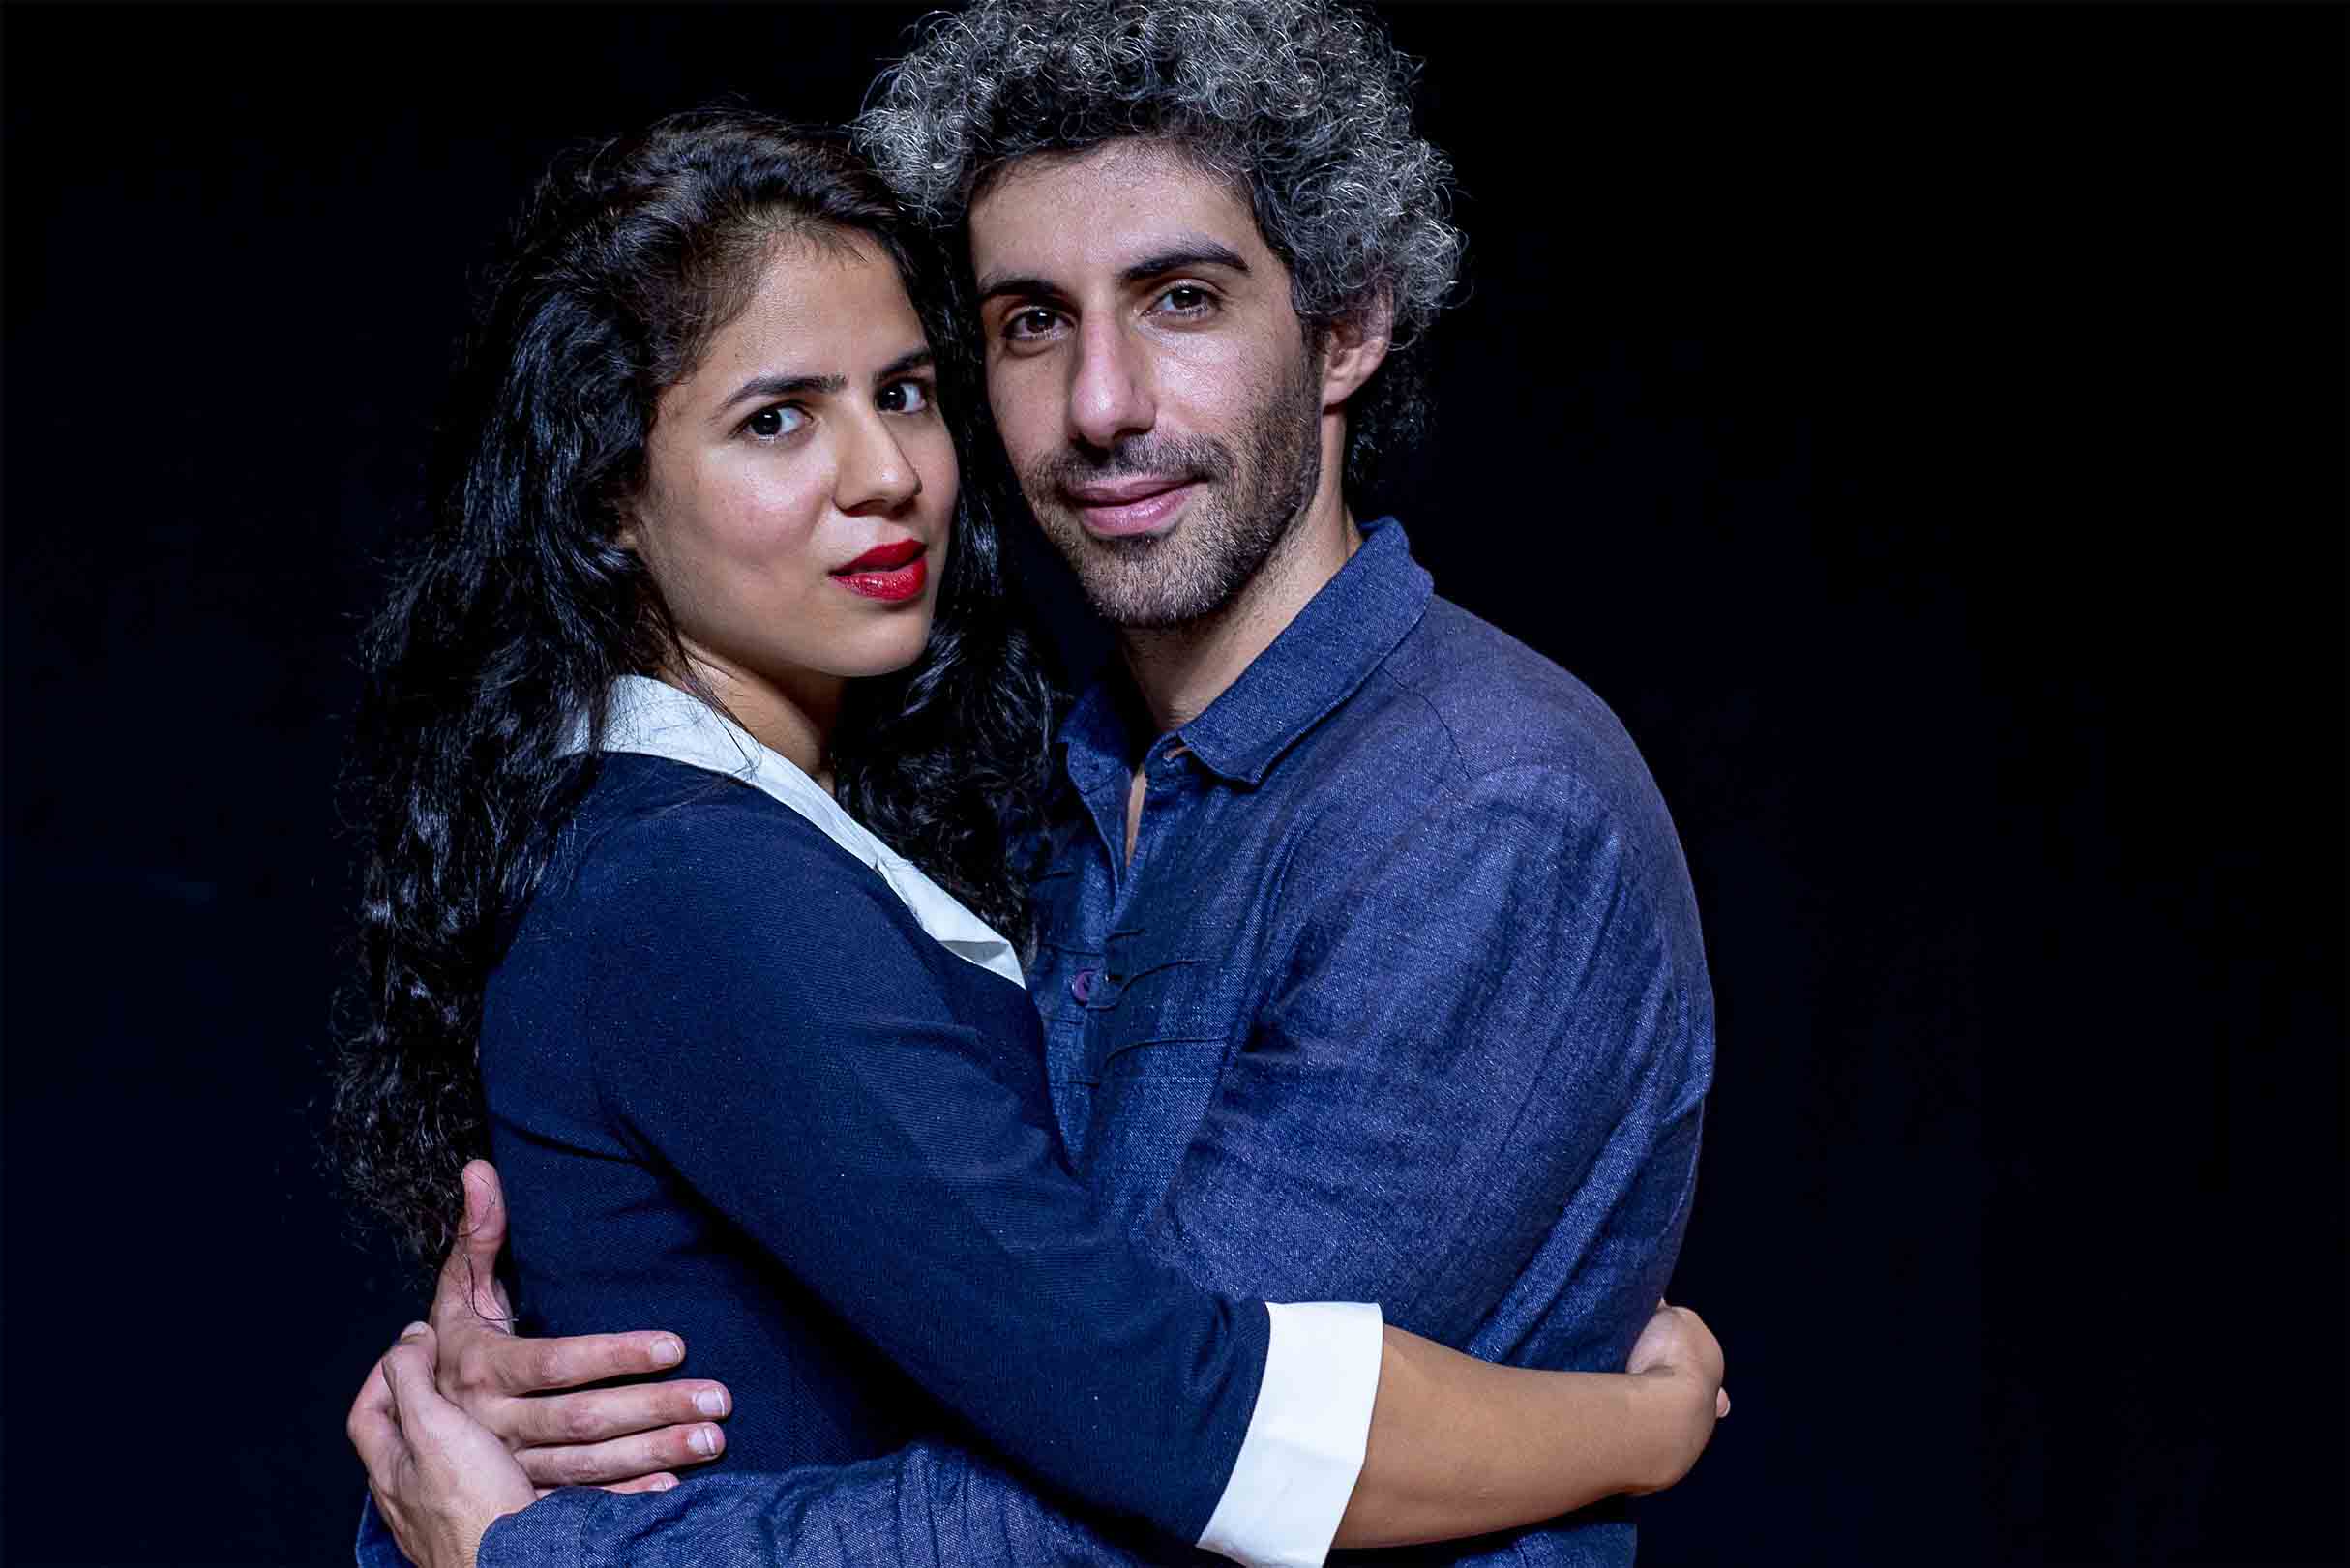 Bruce Guthrie, Constellations, Featured, Jim Sarbh, Love, Mansi Multani, Mumbai, National Centre for Performing Arts, NCPA, Nick Payne, Online Exclusive, Play, Theatre